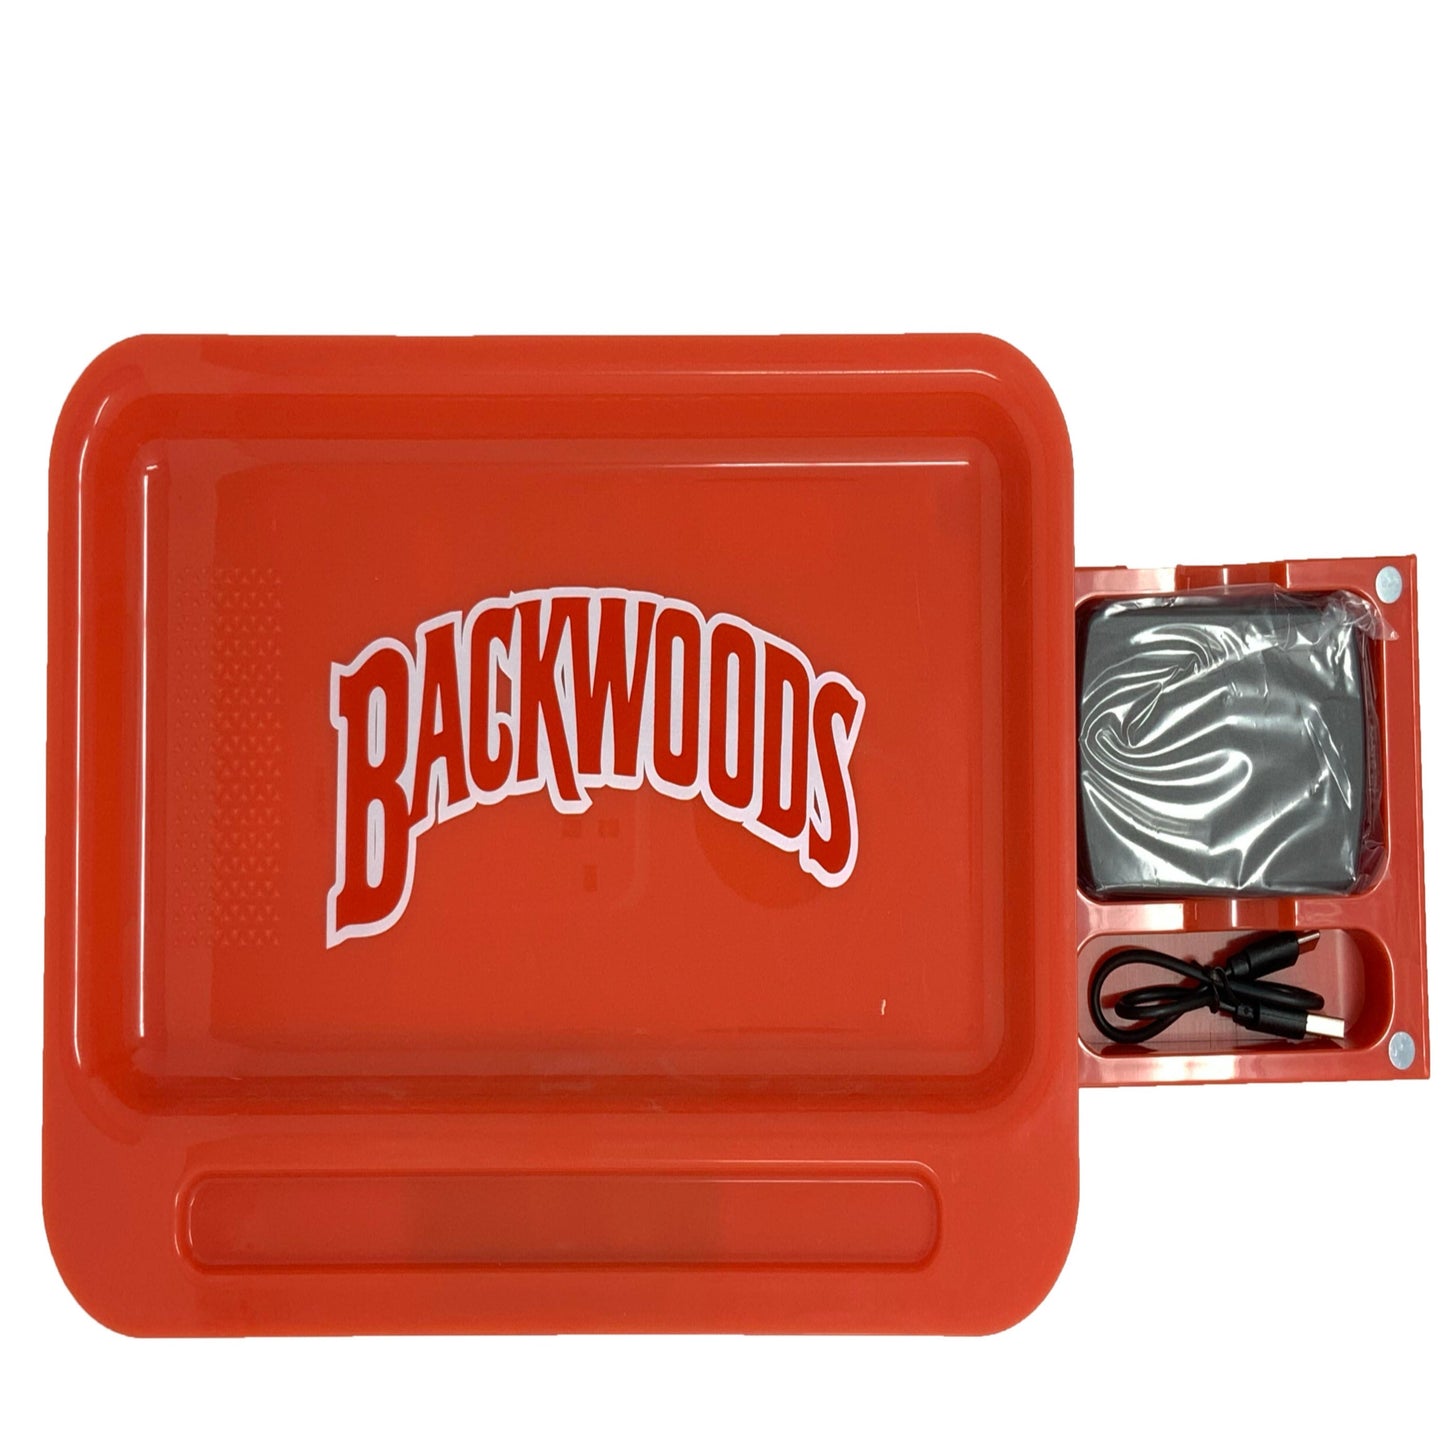 Backwoods LIMITED EDITION SPEAKER Tray